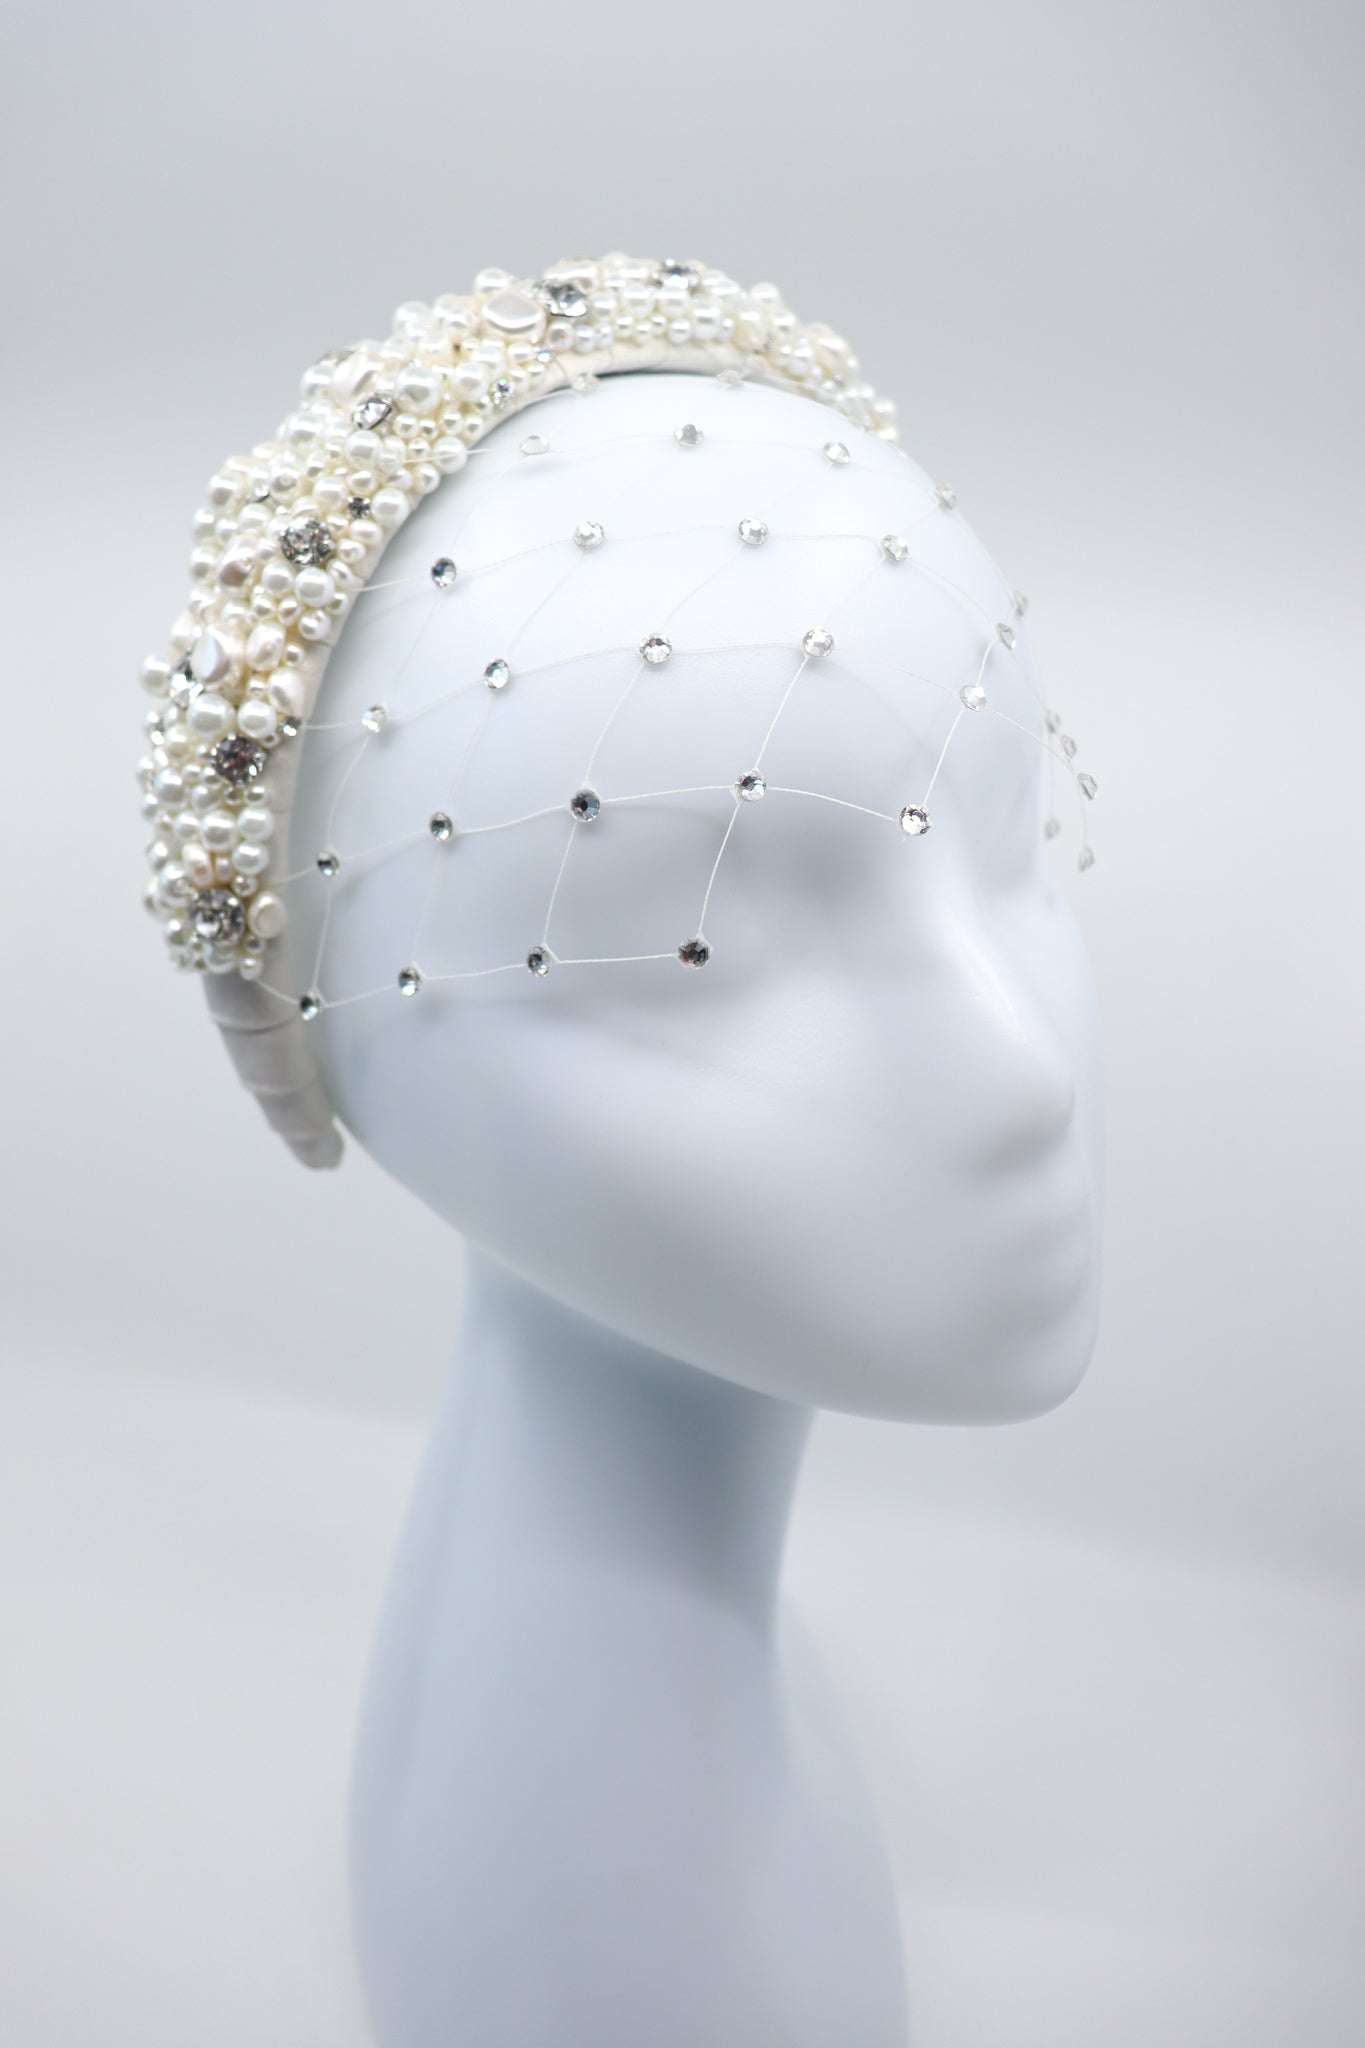 Elegant Luna Wedding Headpiece: Handcrafted with Freshwater Pearls, Swarovski Crystals & Italian Silk. Exquisite Bridal Accessory for Your Special Day.